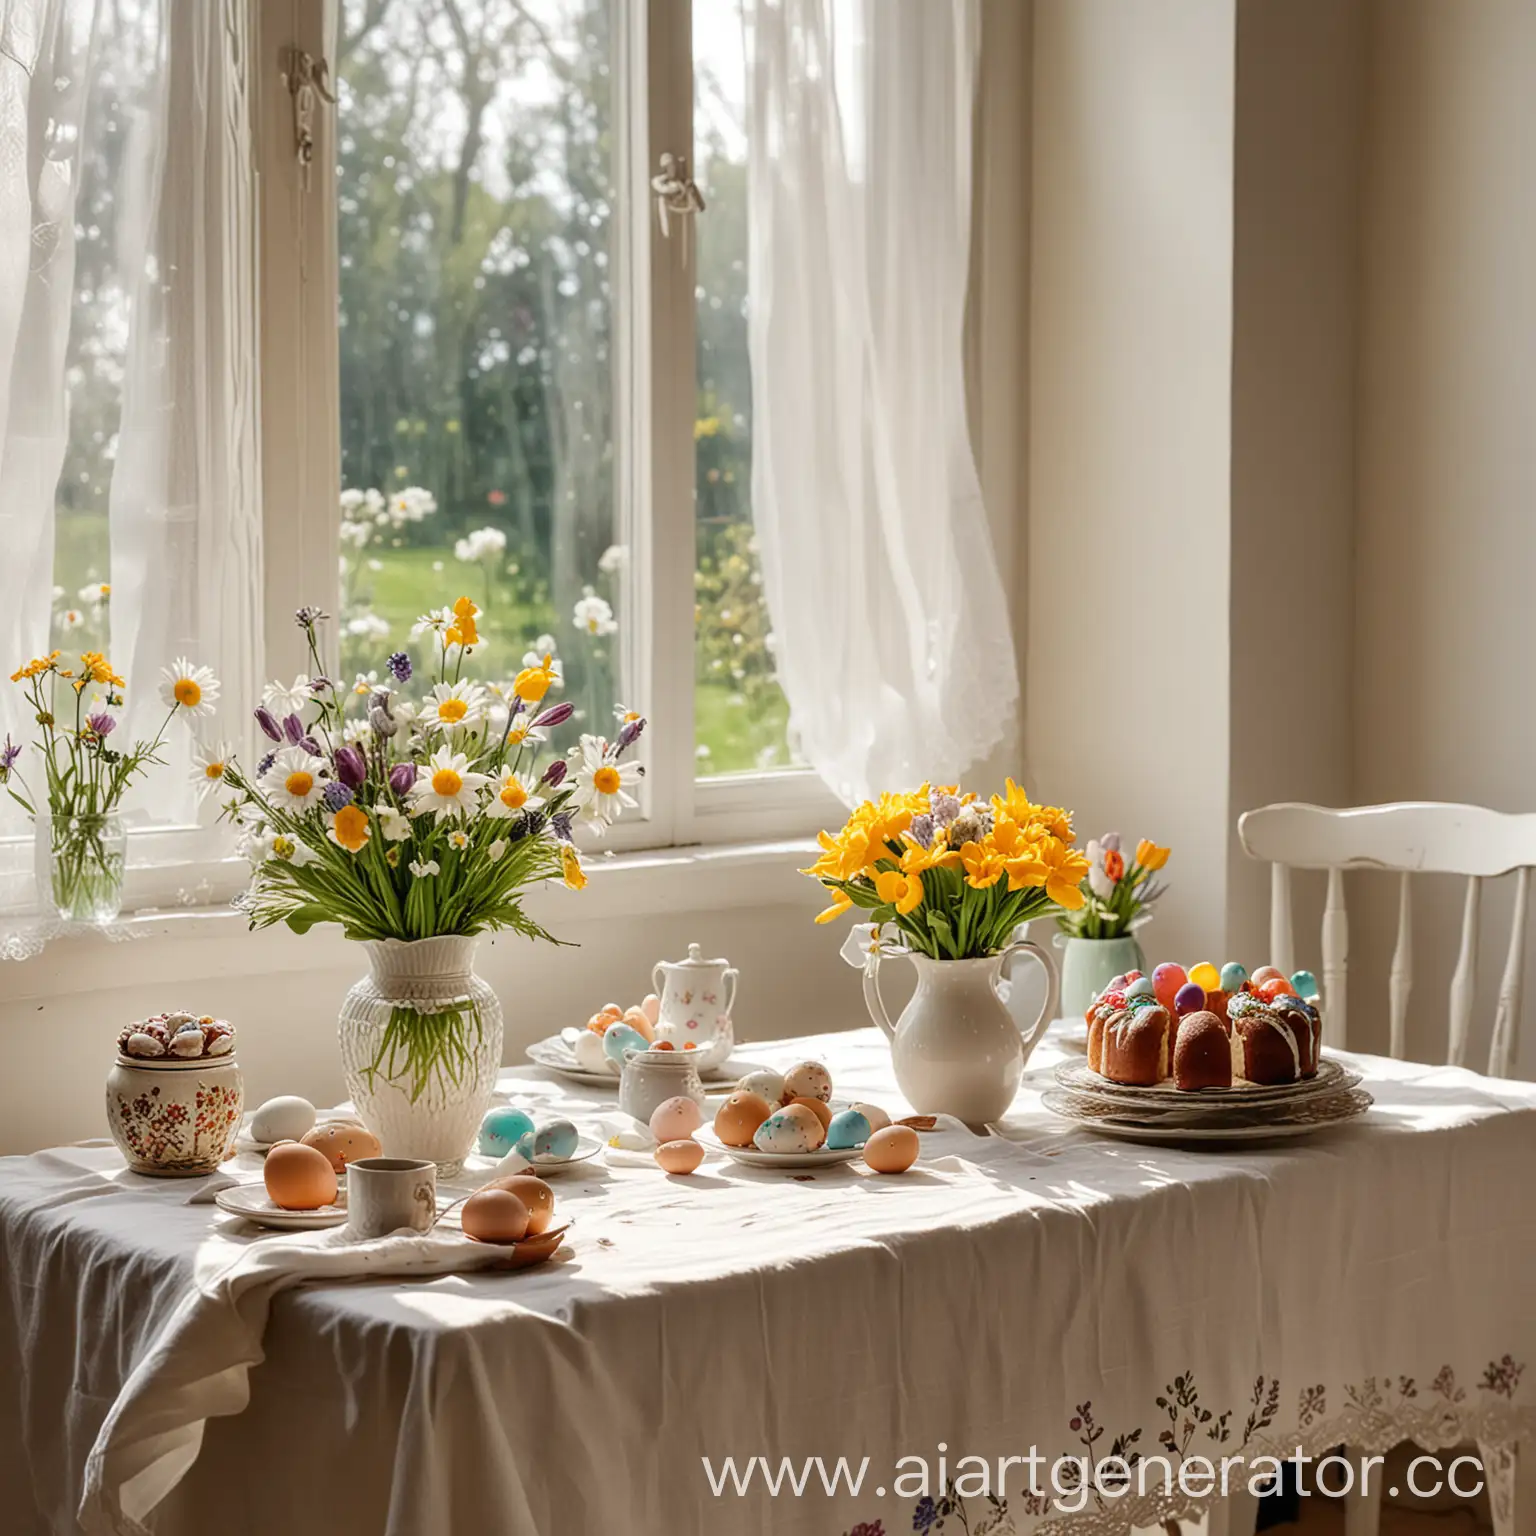 Easter-Table-Setting-with-Painted-Eggs-Cakes-and-Flowers-in-Sunlit-Room